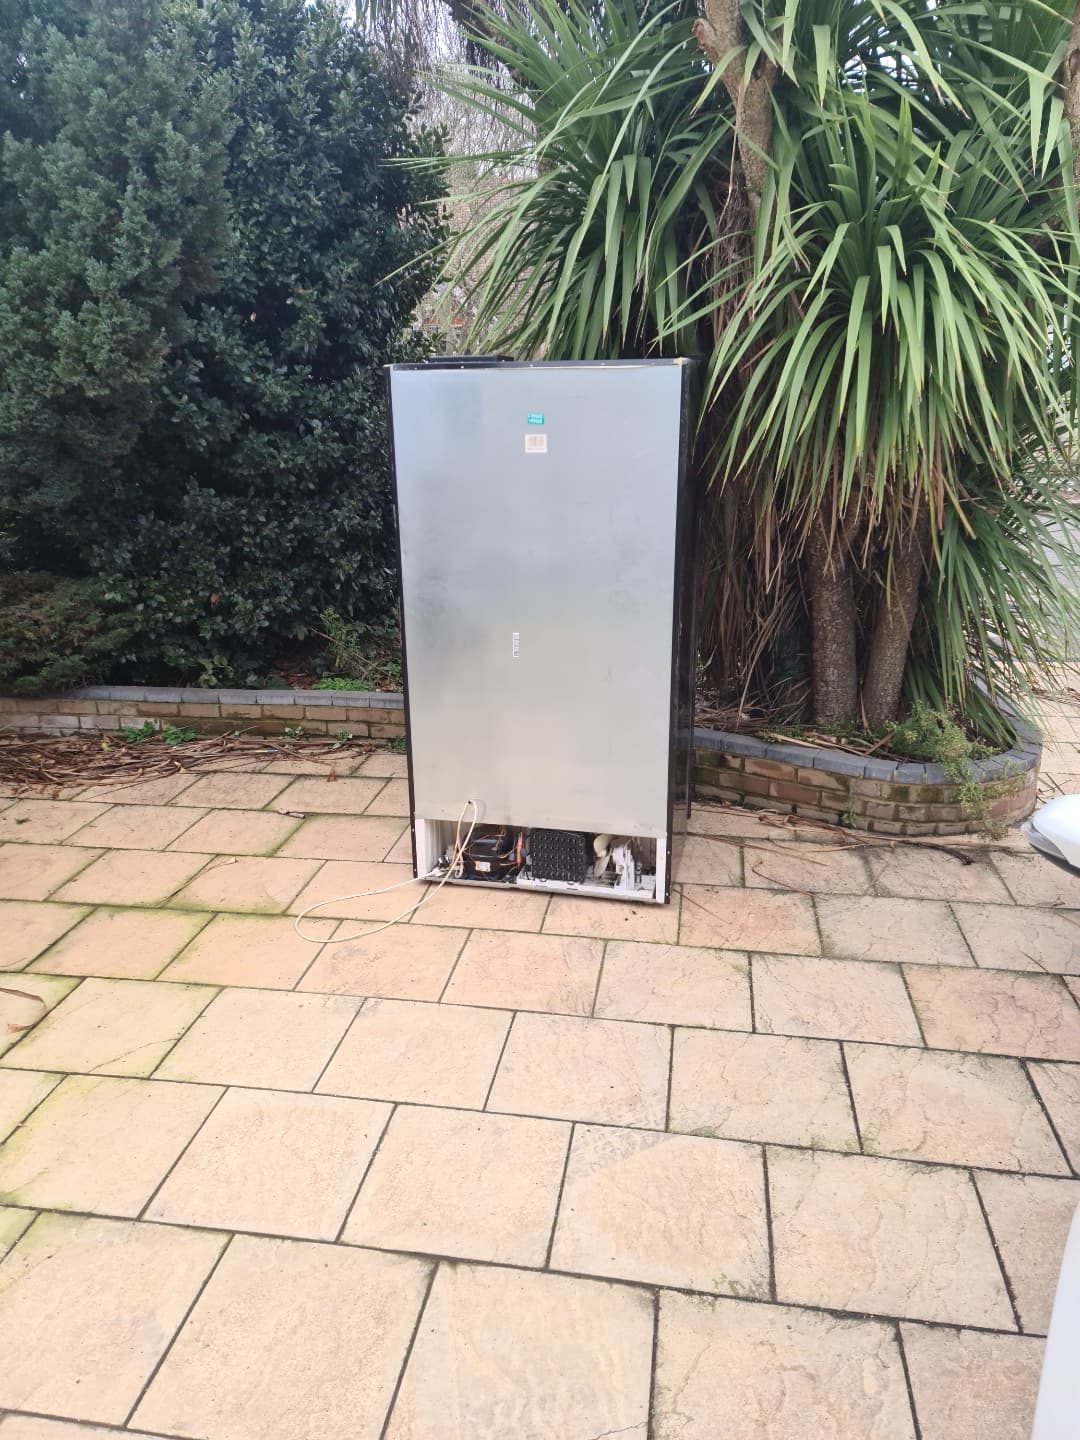 example of a broken fridge removal for £45 price